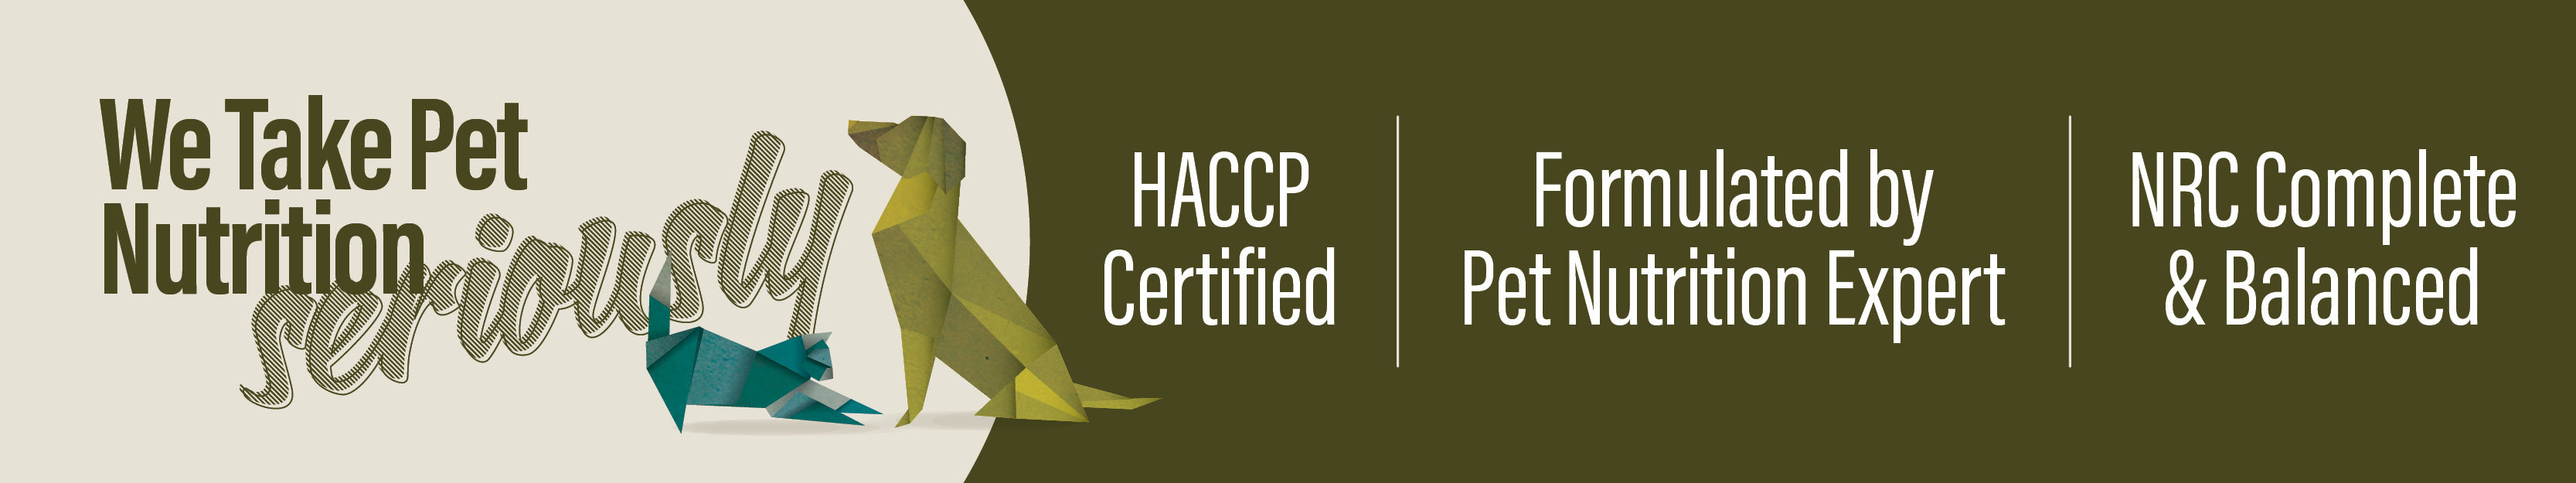 we take pet nutrition seriously - HACCP Certified - Formulated by pet nutrition expert - made in Canada - NRC complete & balanced